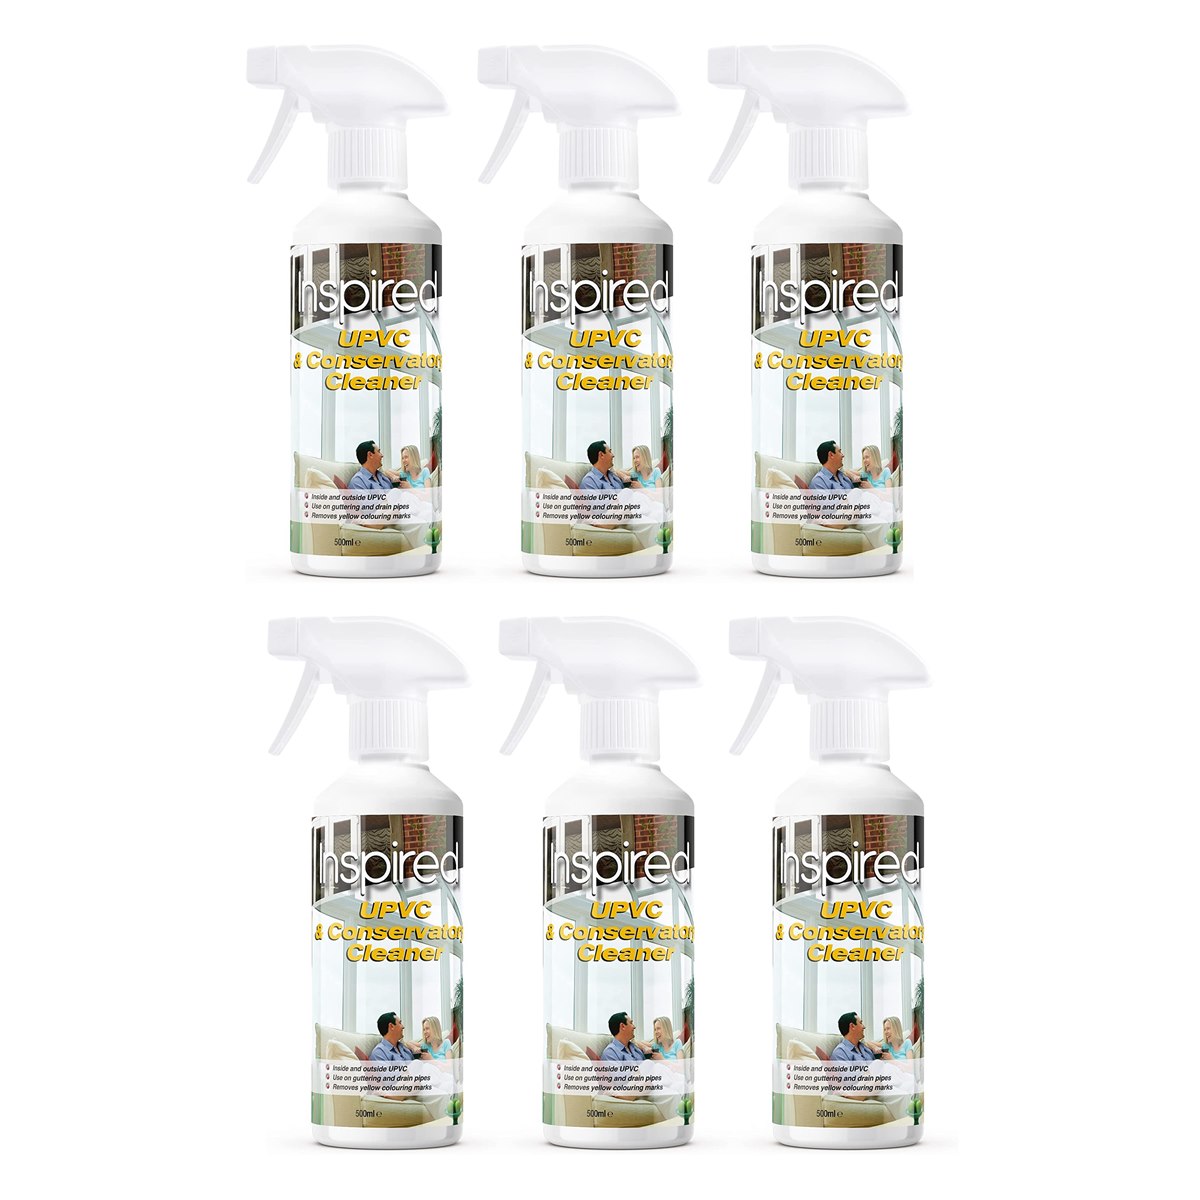 Case of 6 x Inspired UPVC and Conservatory Cleaner Spray 500ml